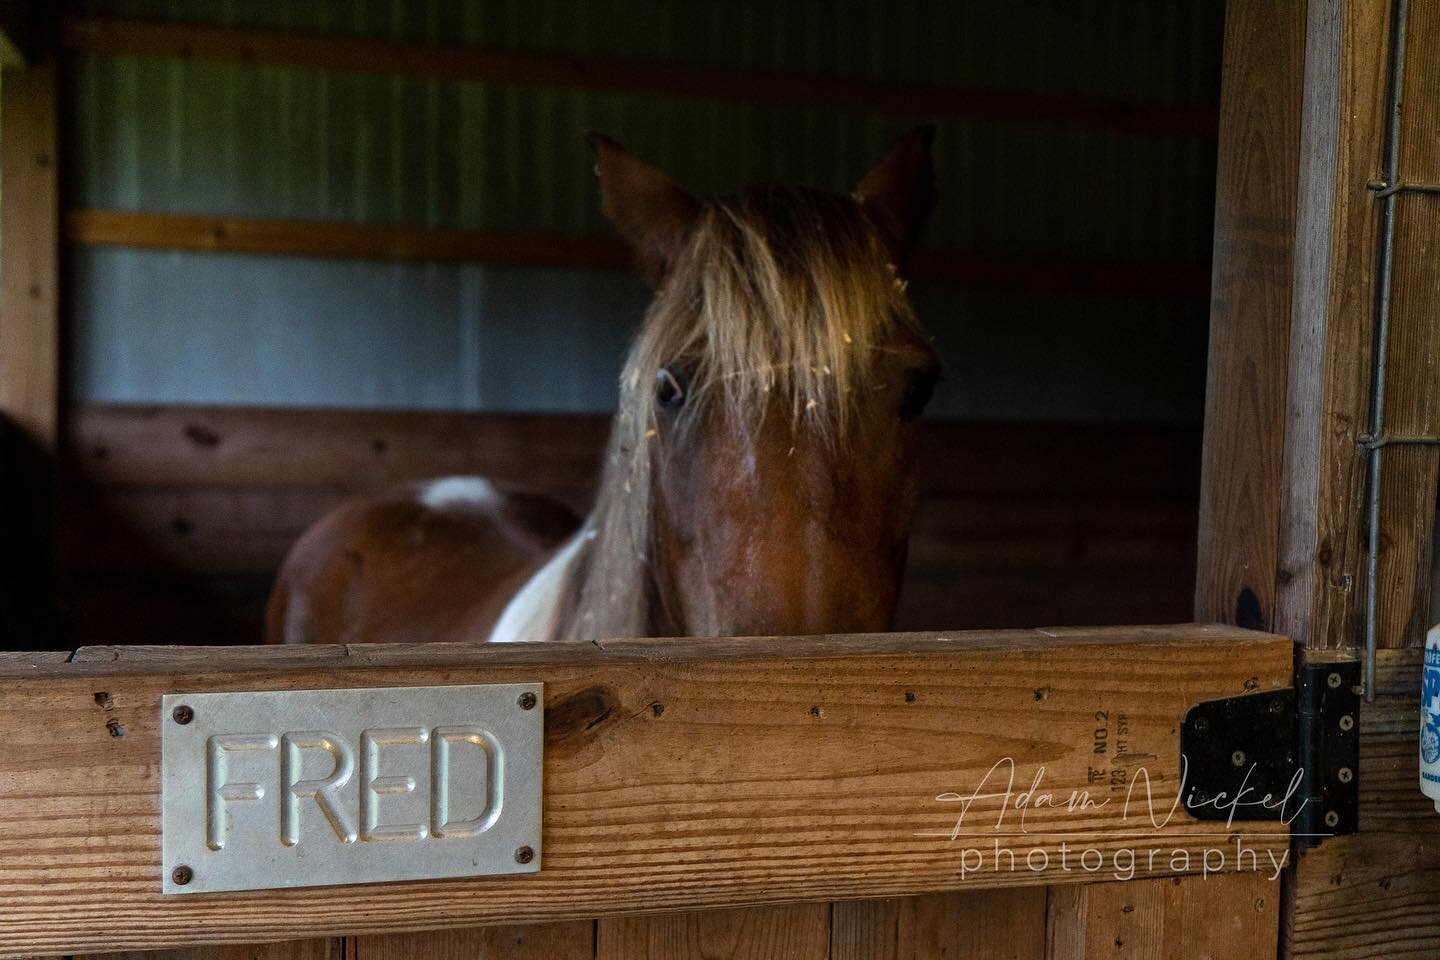 Say hello to Fred the horse. He&rsquo;s a darling pony whom we found at our @airbnb in Florence South Carolina. Our host was kind enough to let our kids feed him. They got a great review and we&rsquo;ll be back there next year. #horse #horsesofinstag